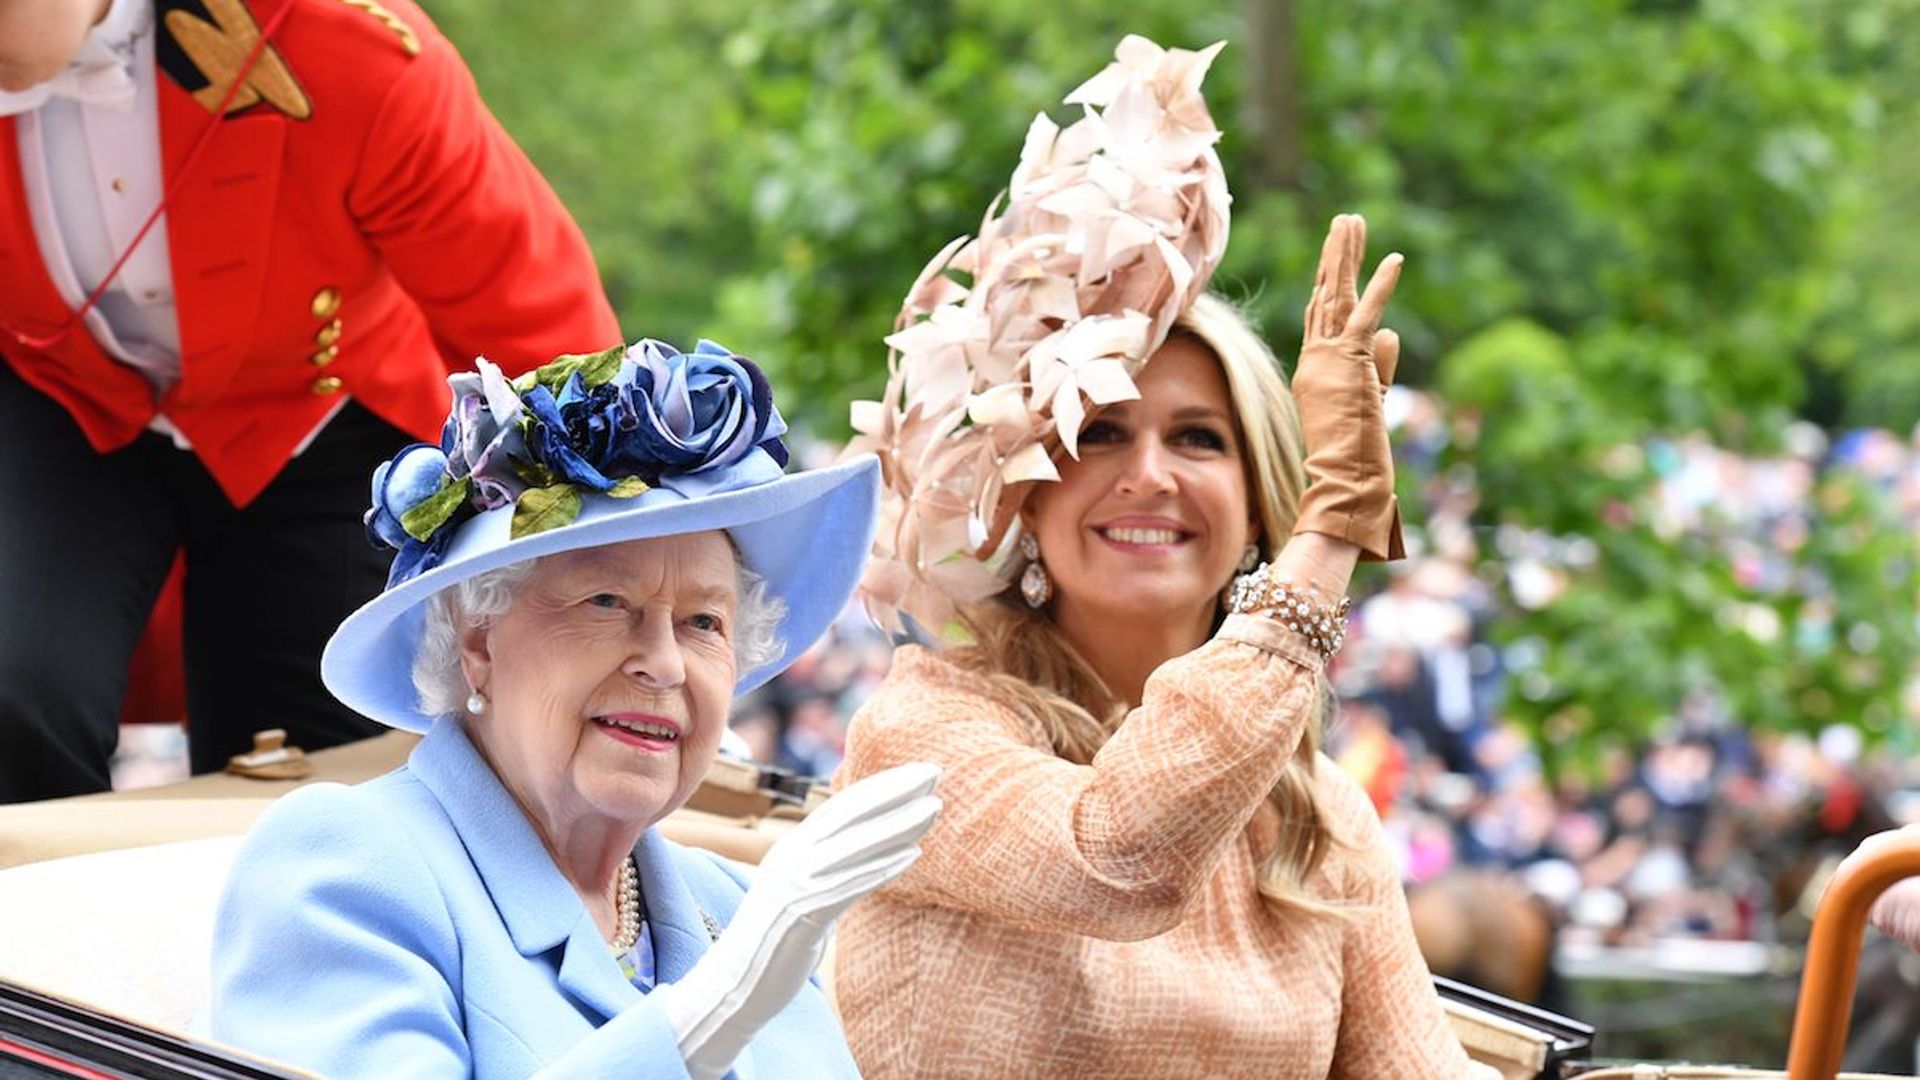 Queen Maxima stuns in incredible floral hat as she re-joins the Queen and Duchess Kate at Royal Ascot